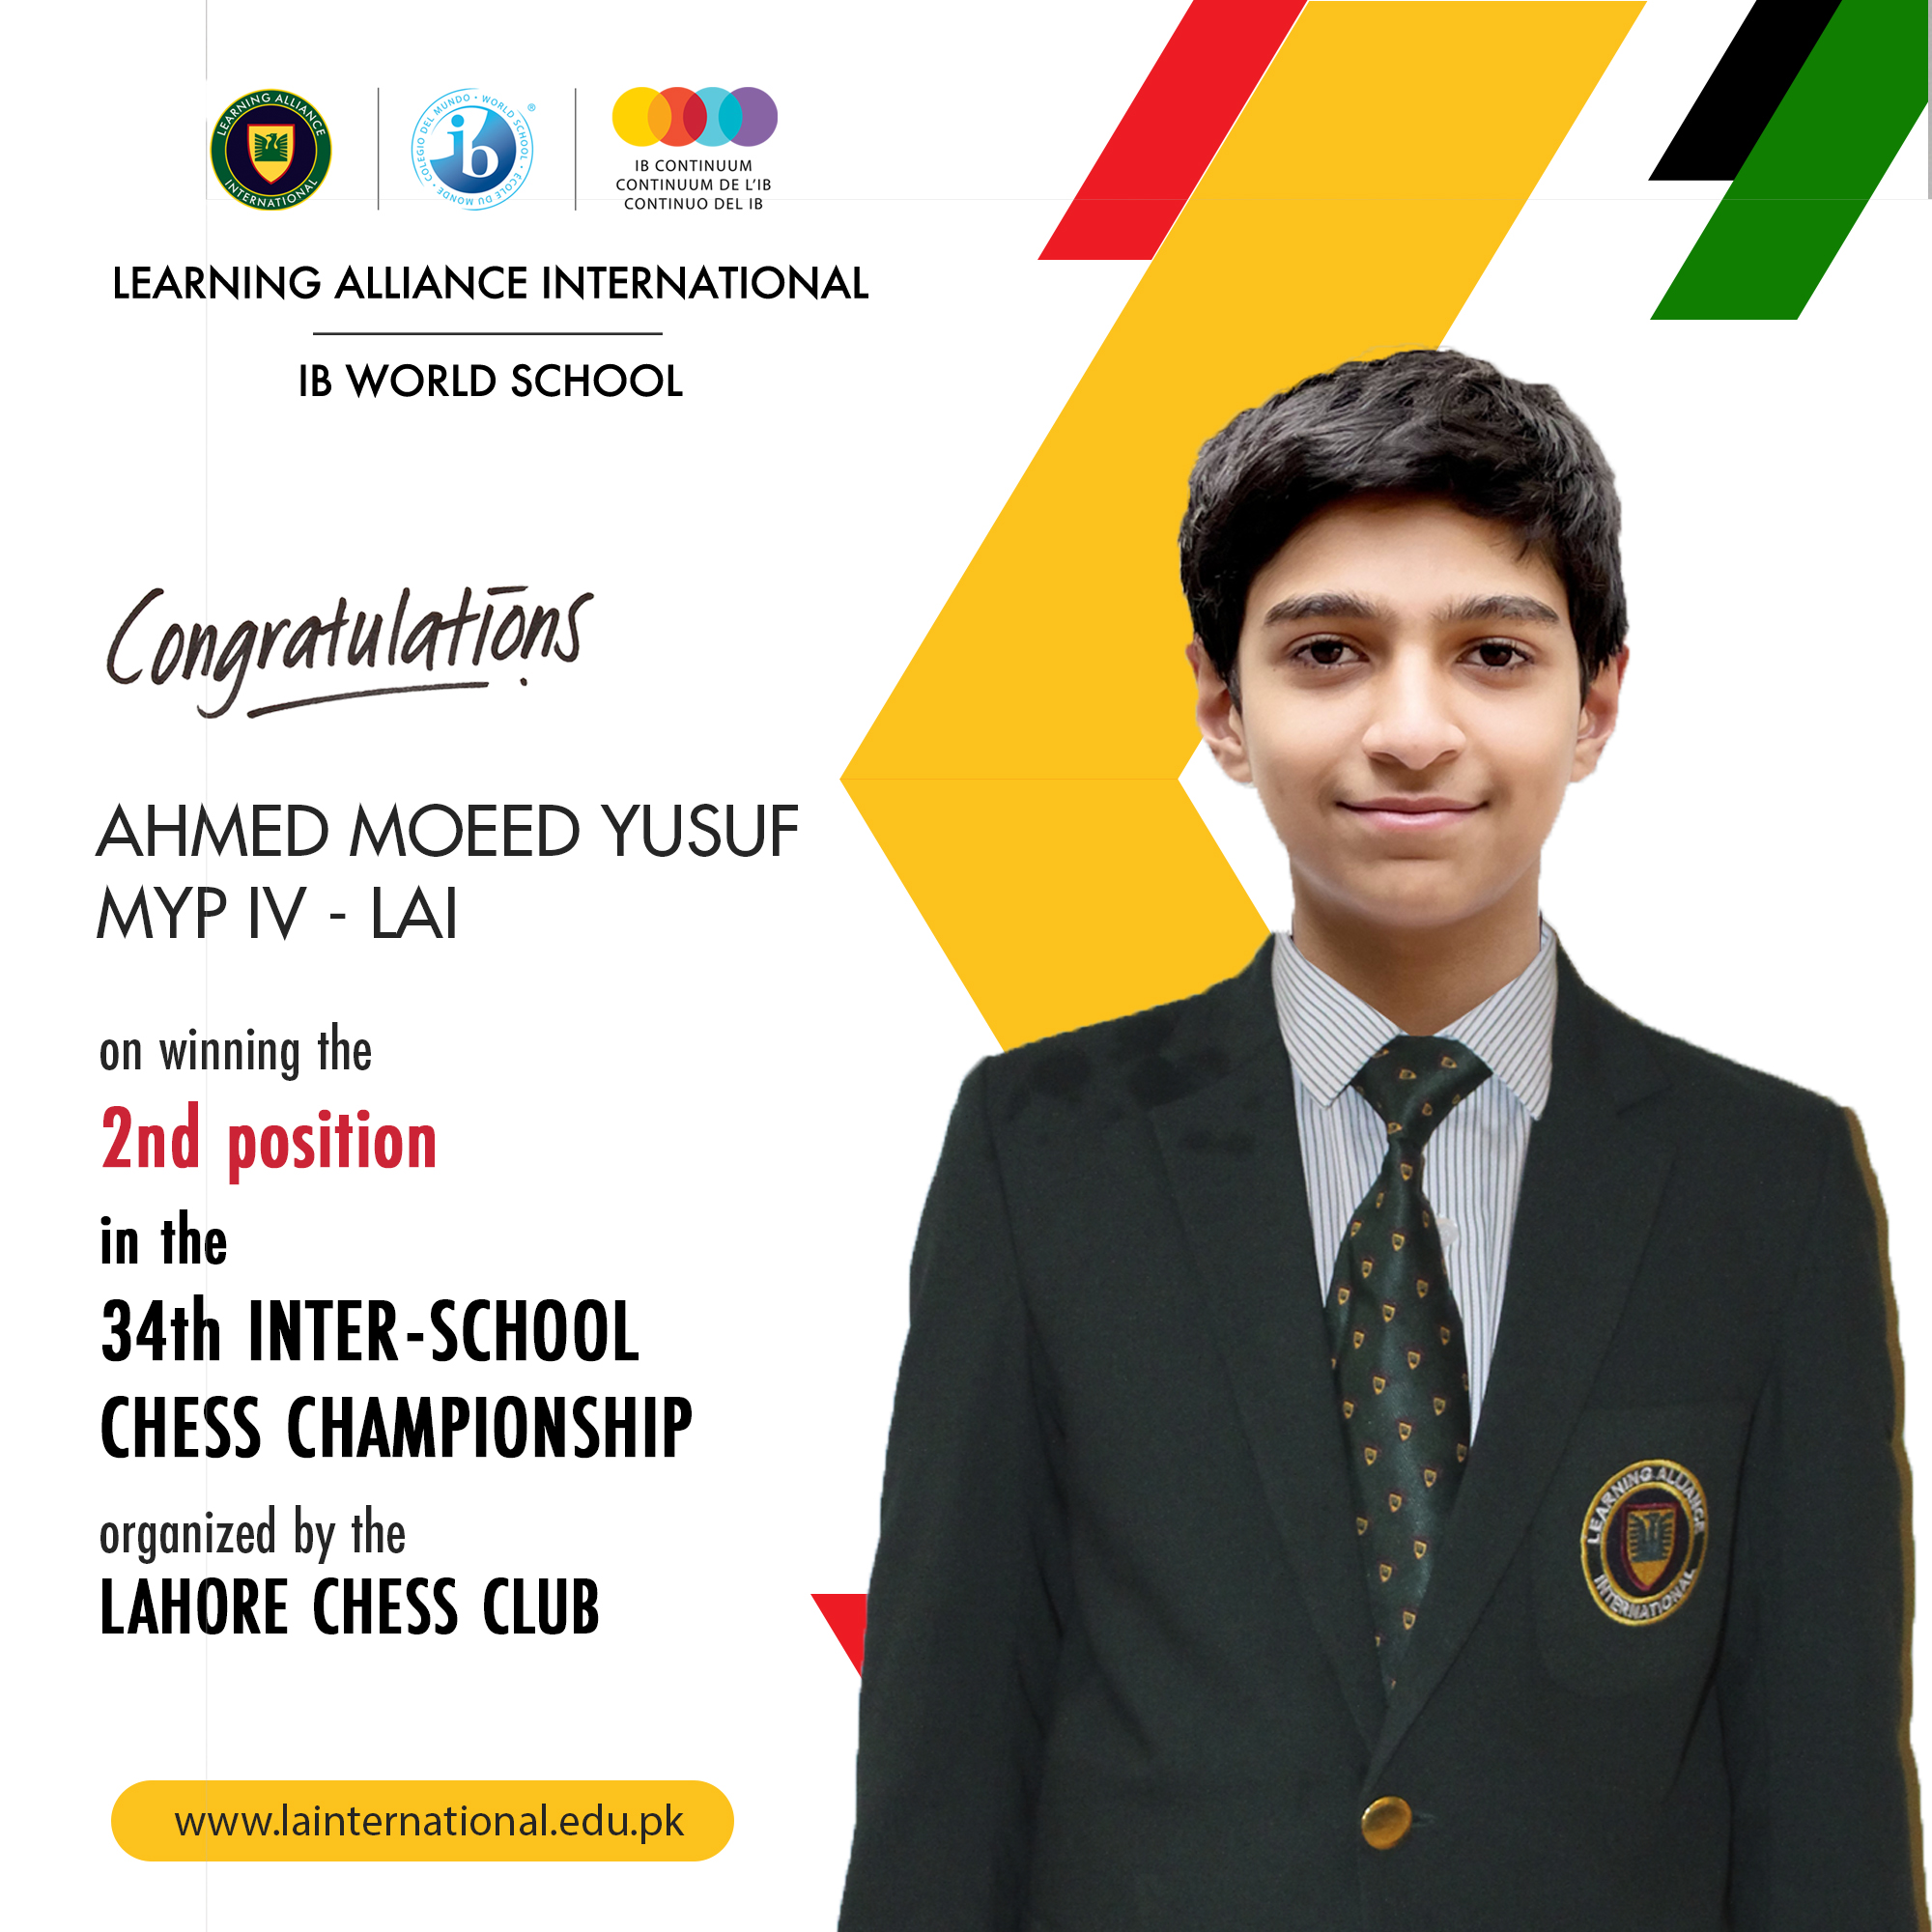 2nd Place in the 34th Inter-school Chess Championship